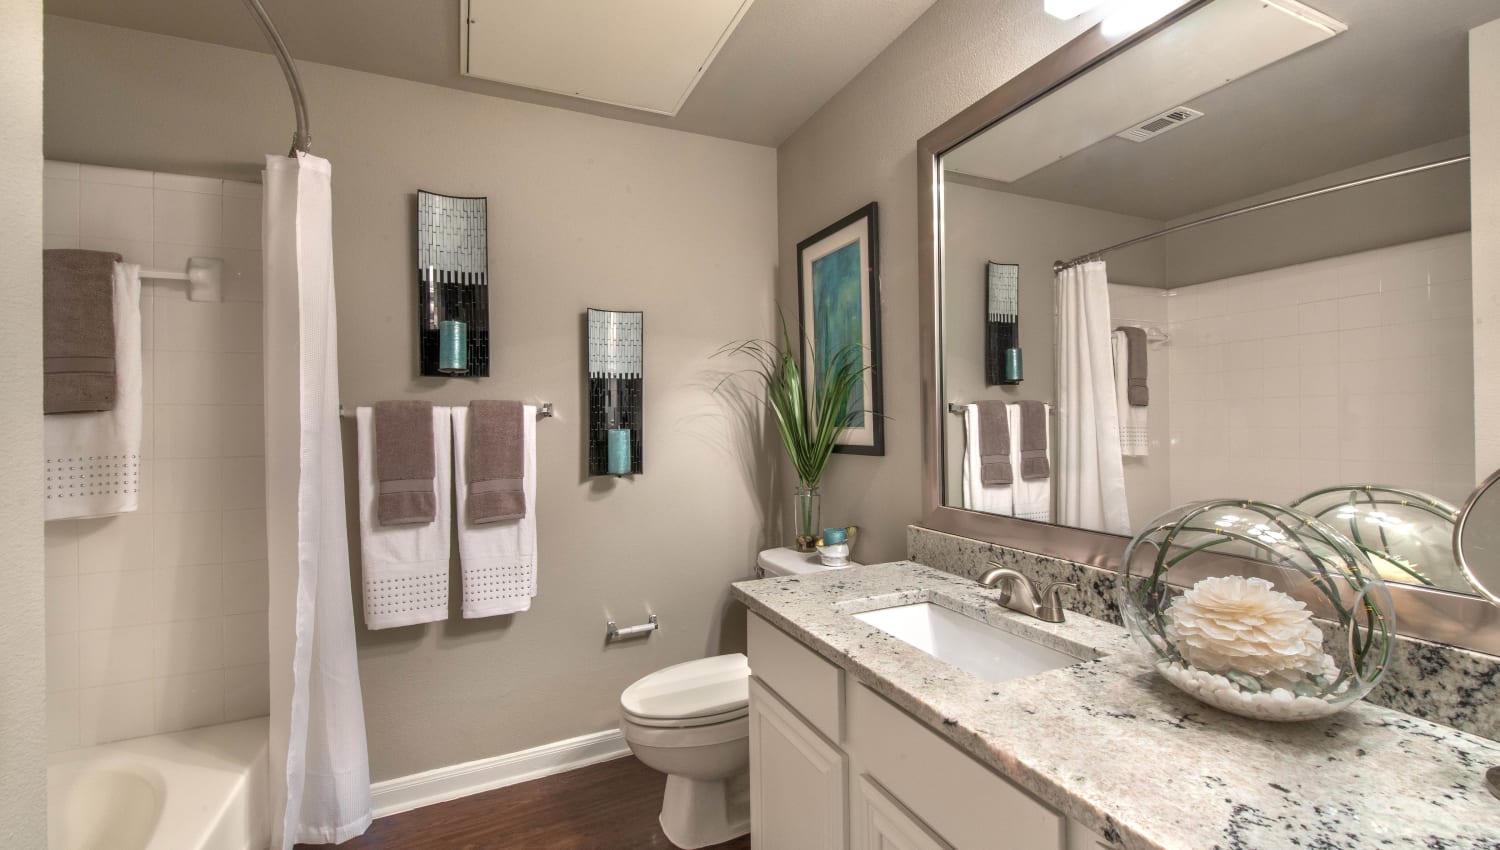 Primary bathroom with a tiled shower and hardwood flooring in a model home at Olympus Las Colinas in Irving, Texas